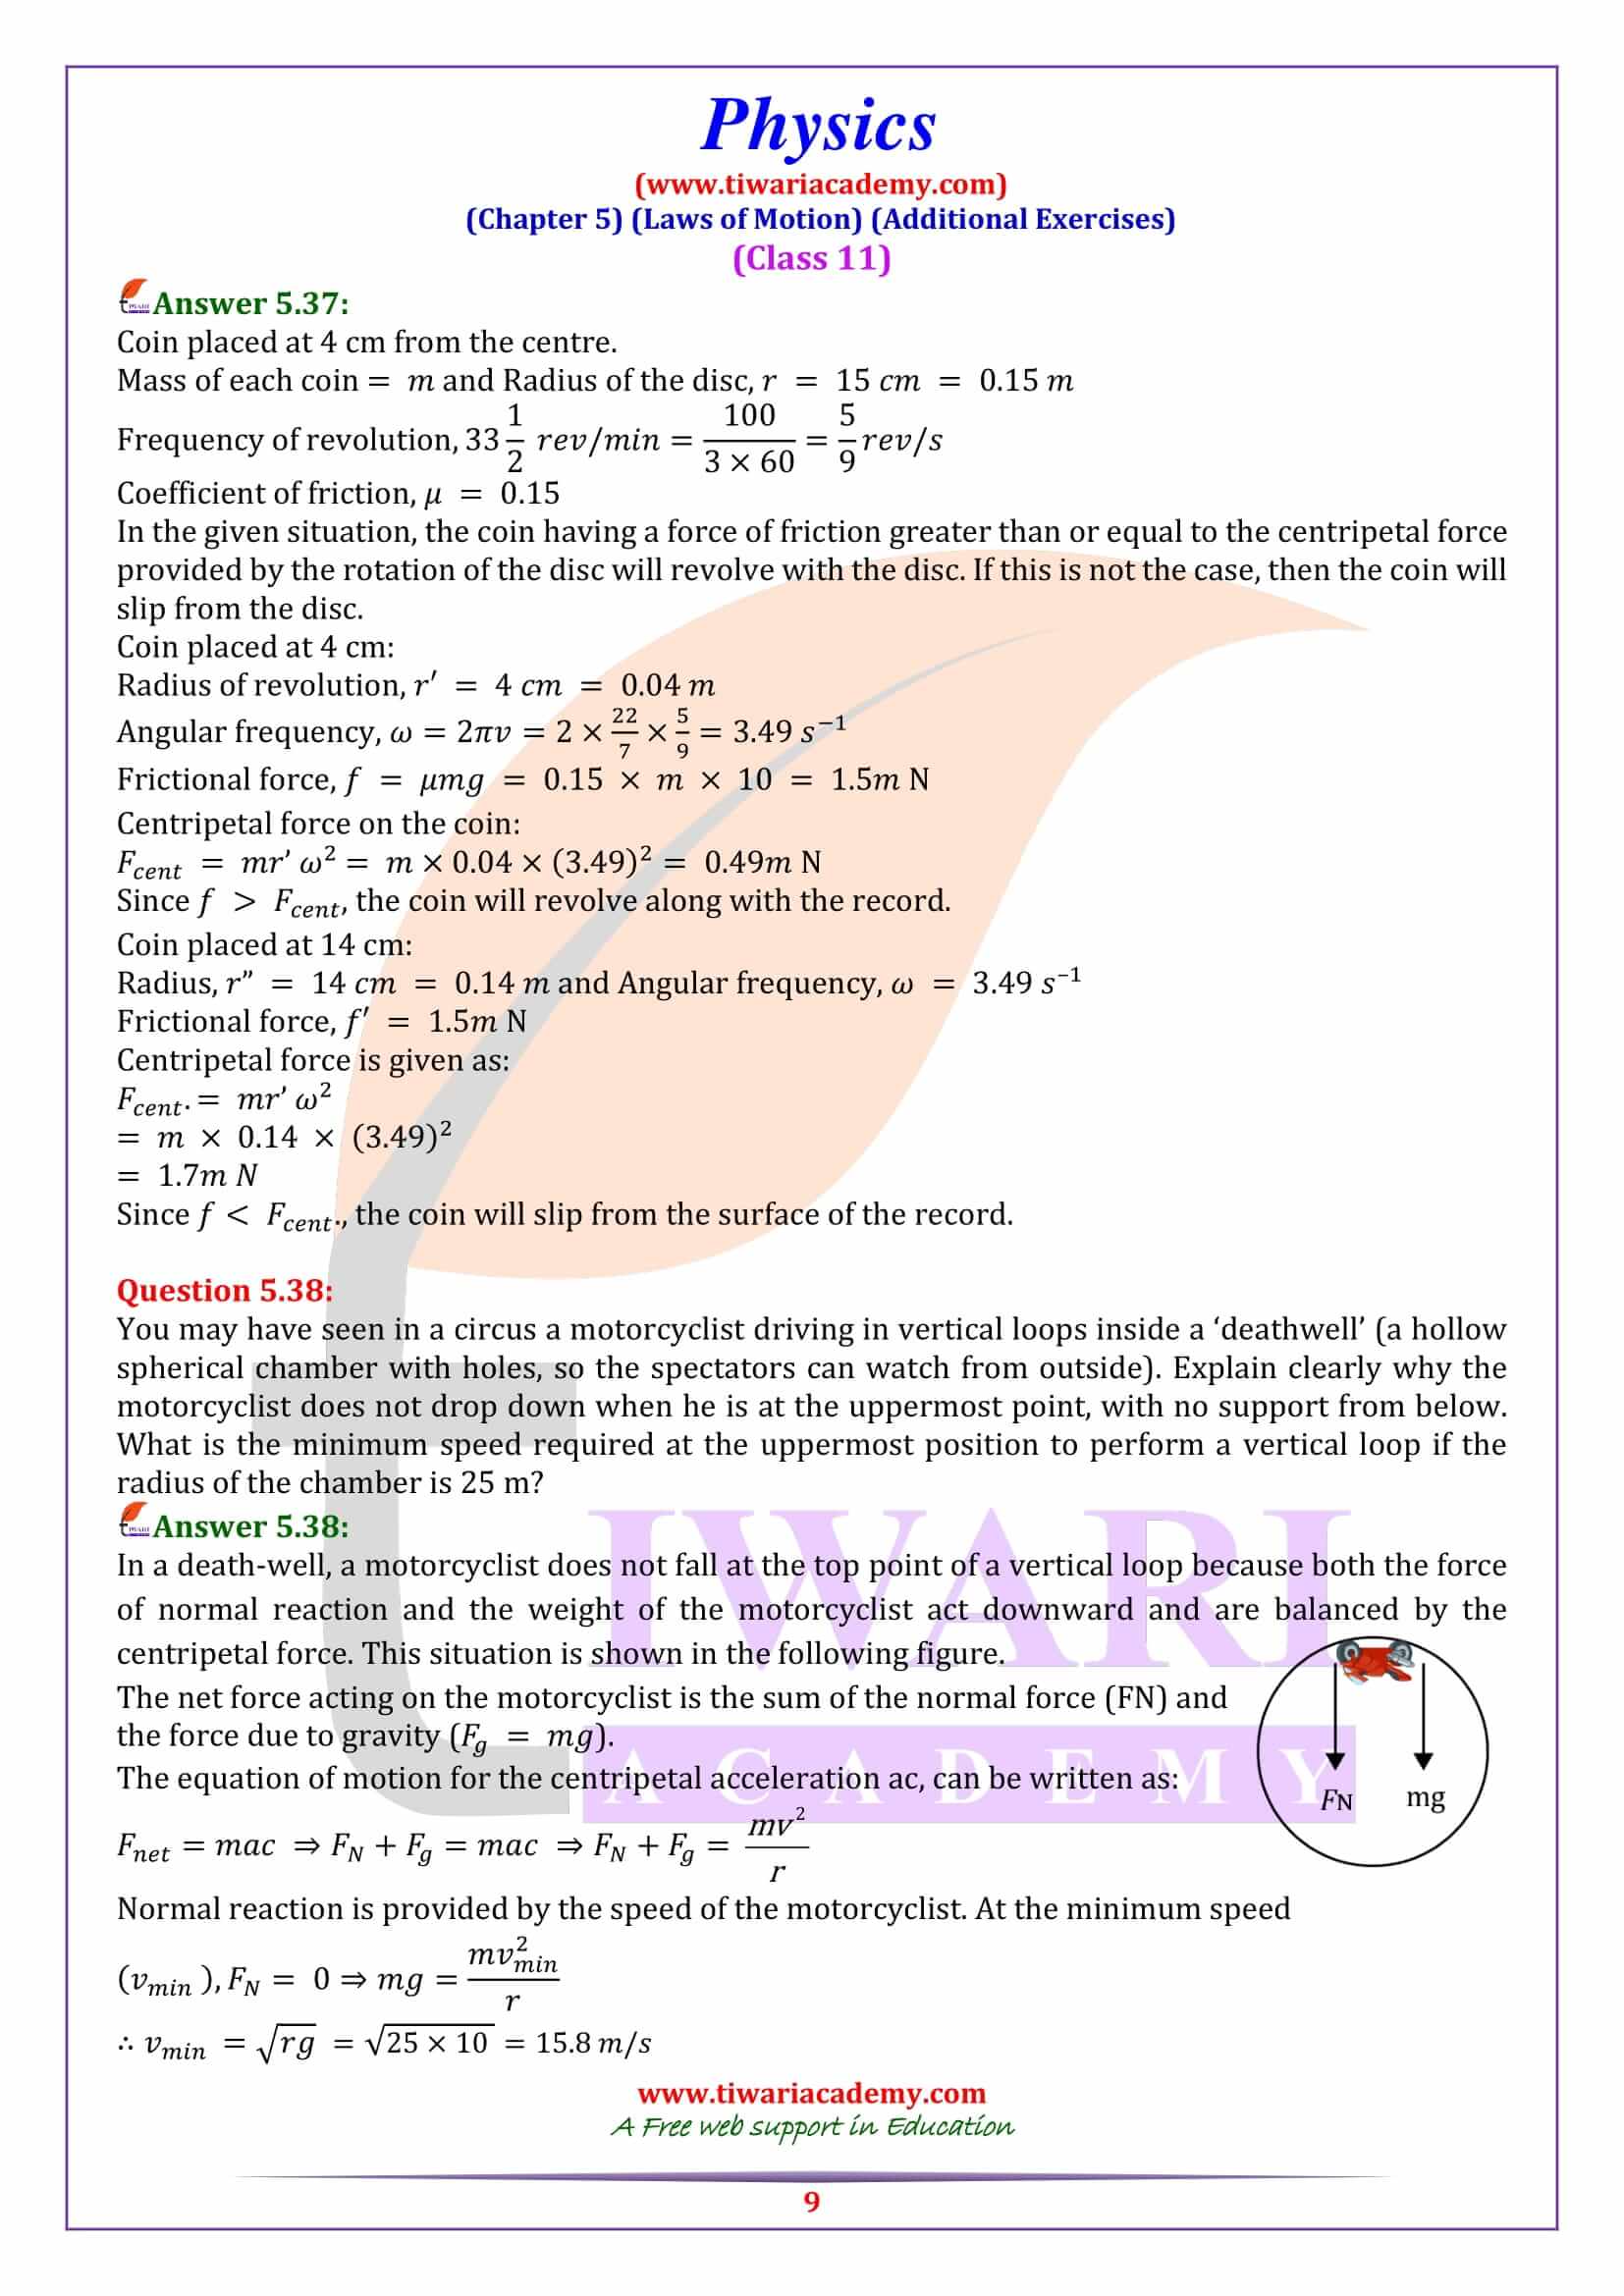 NCERT Solutions for Class 11 Physics Chapter 5 Additonal Question Answers